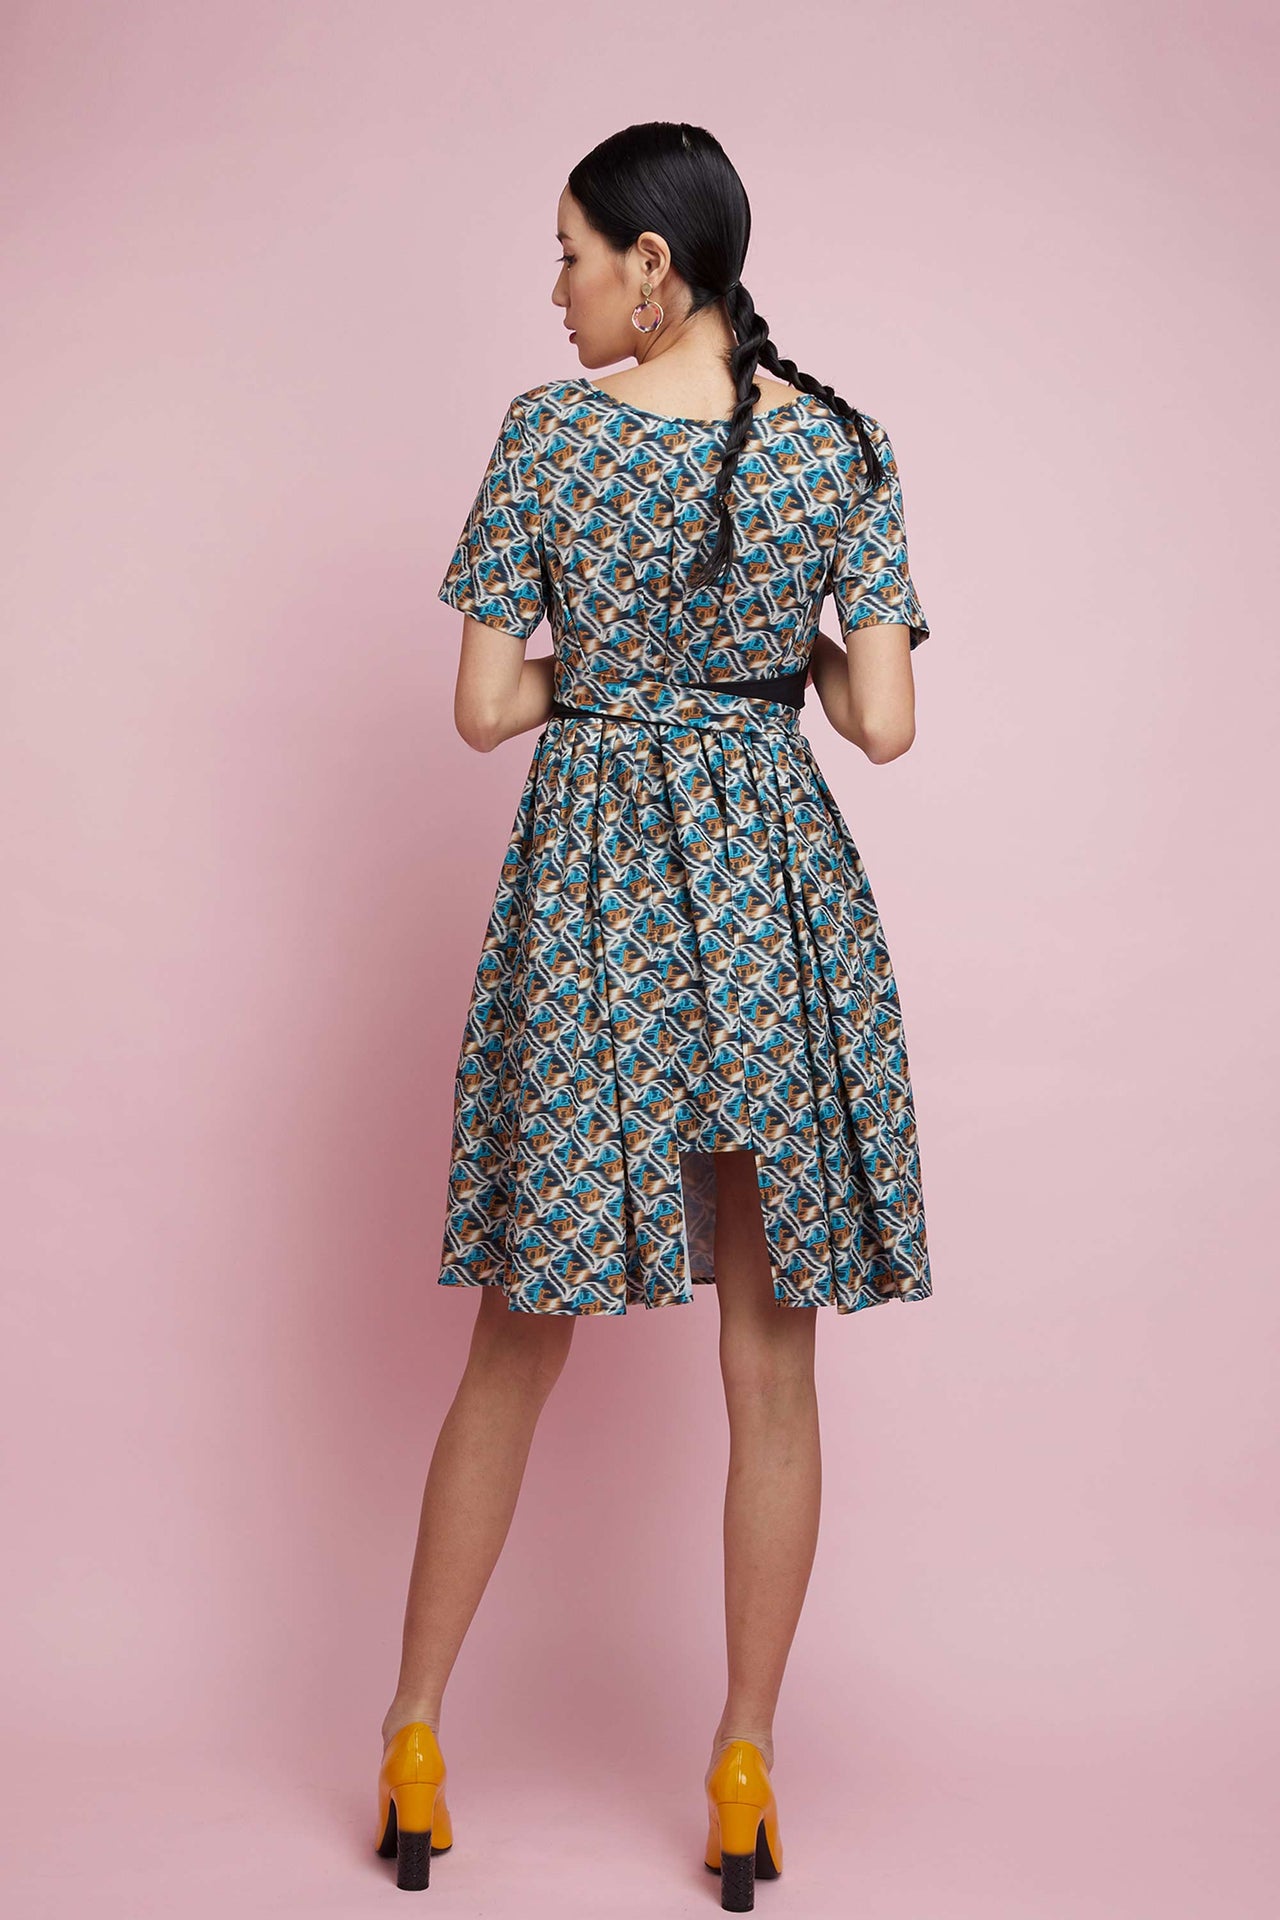 Back-to-Front Dual Box Pleat "Mi-Knee" Dress (Helicon Kecil)